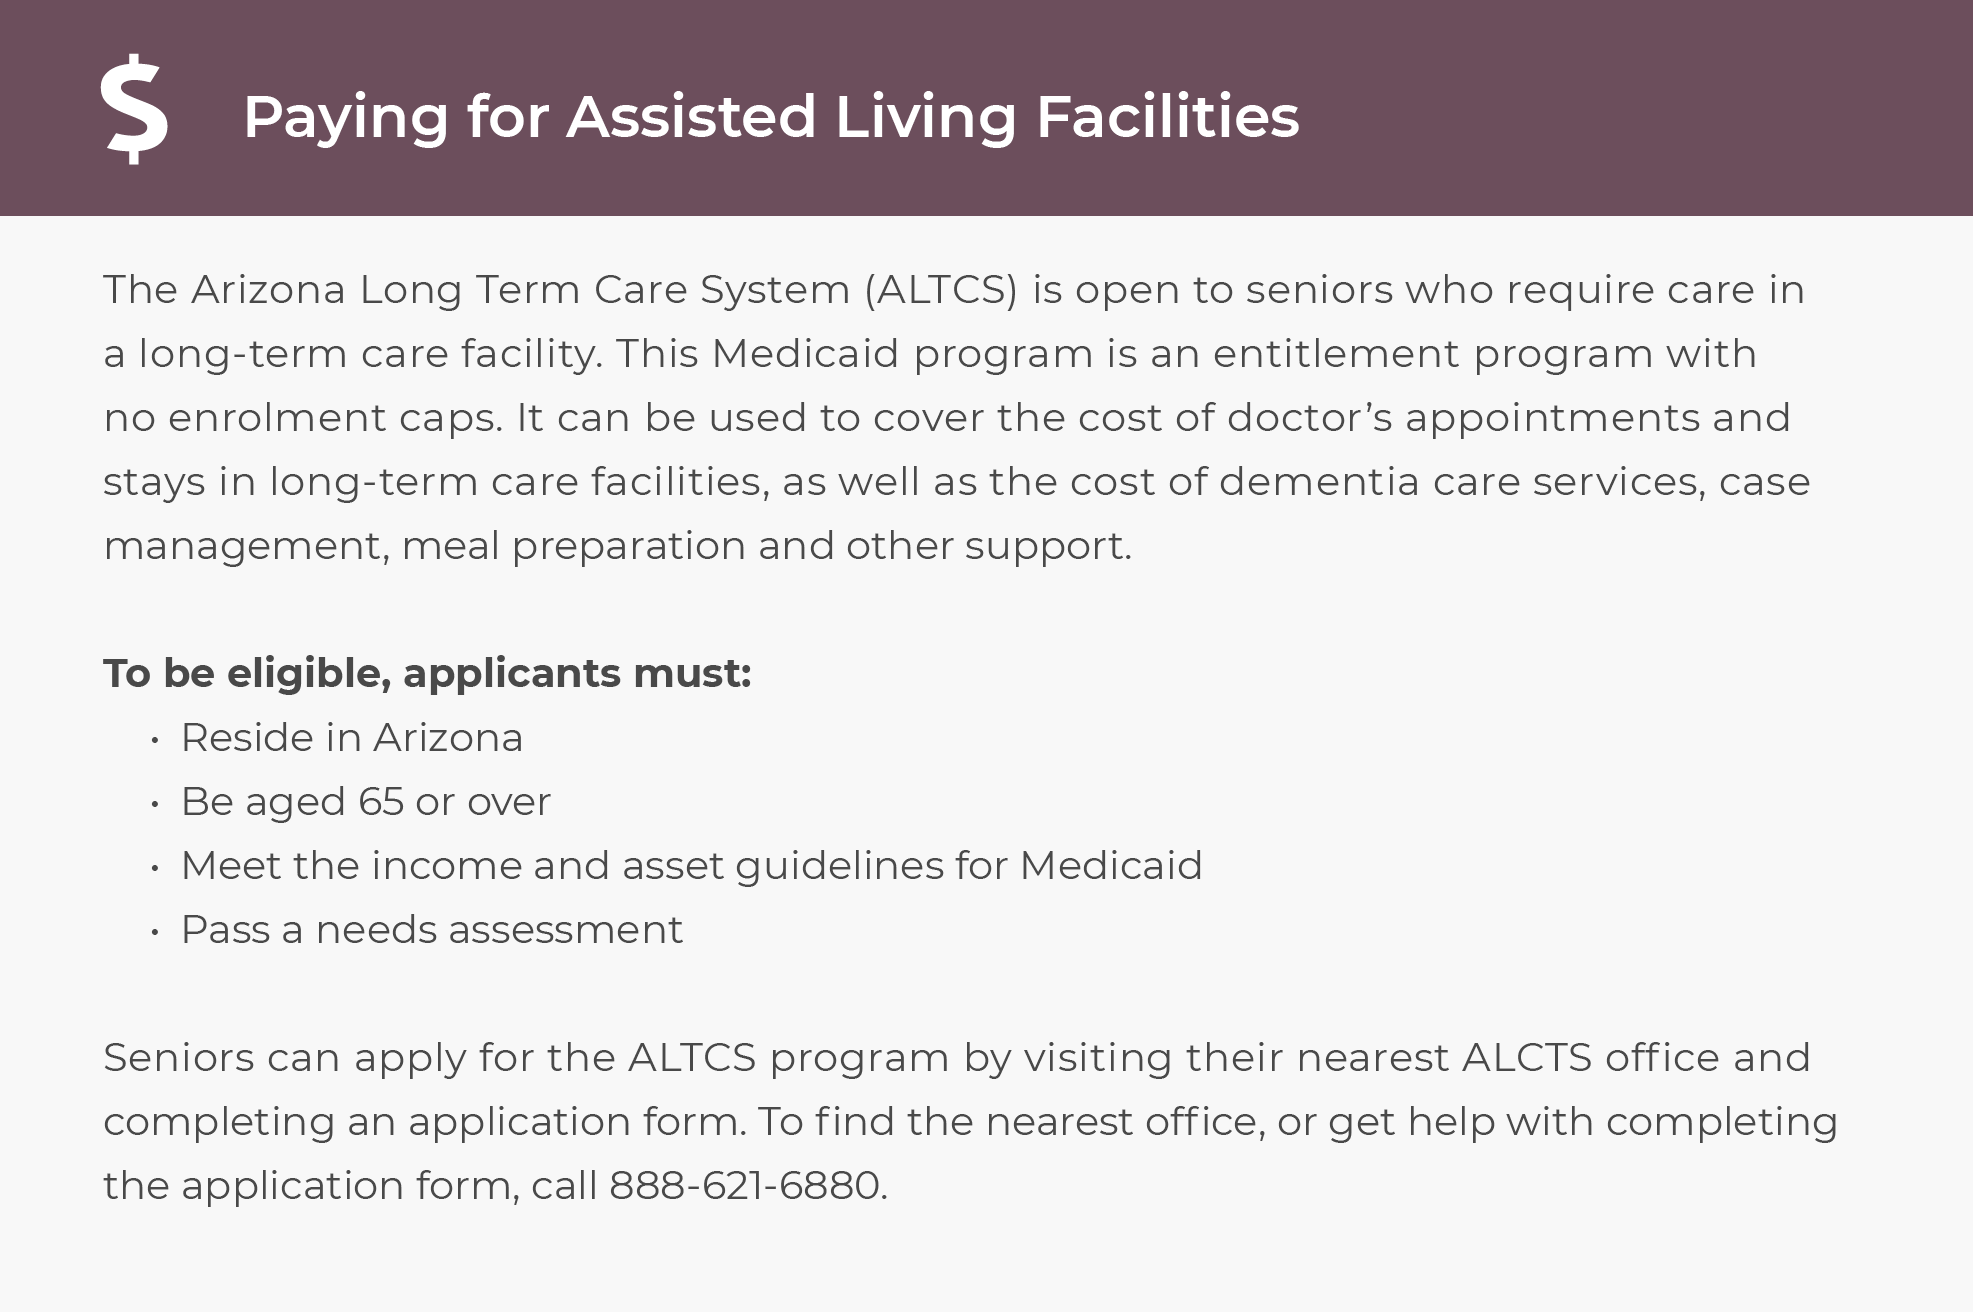 Paying for assisted living facilities in Arizona